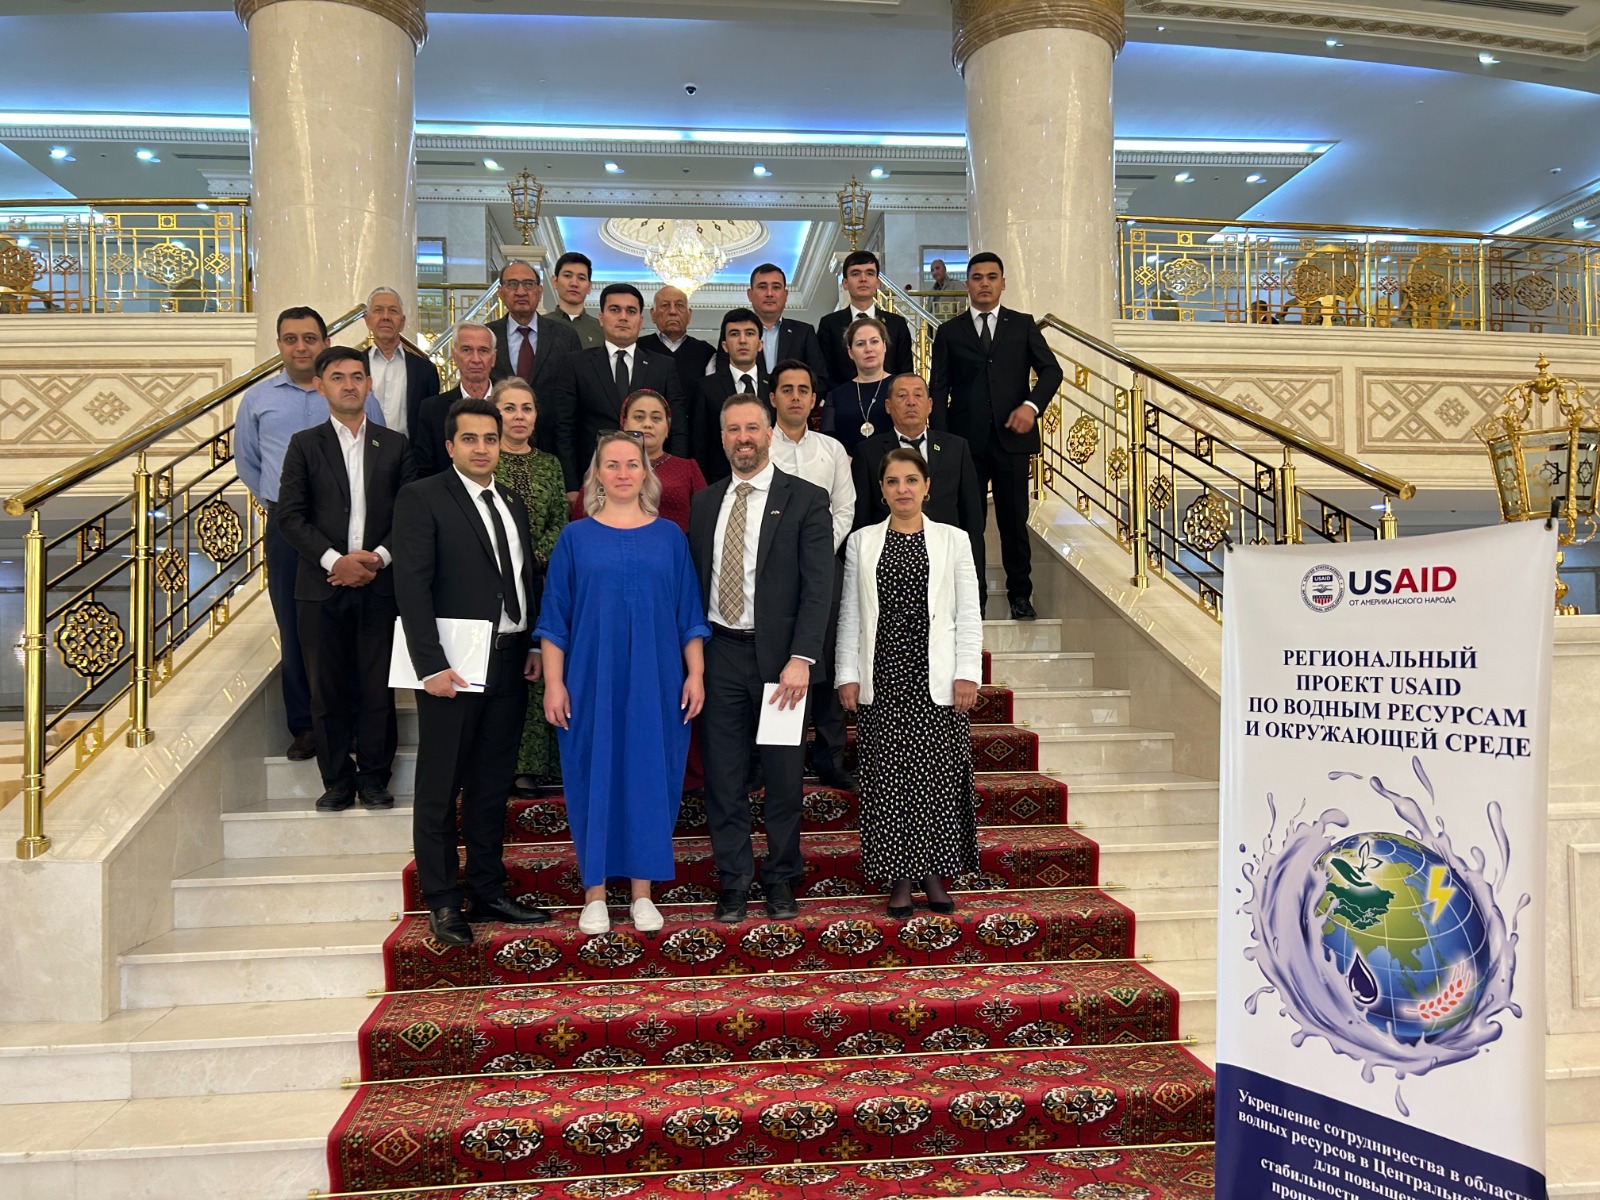 Workshop on Basin planning and management issues in Turkmenistan